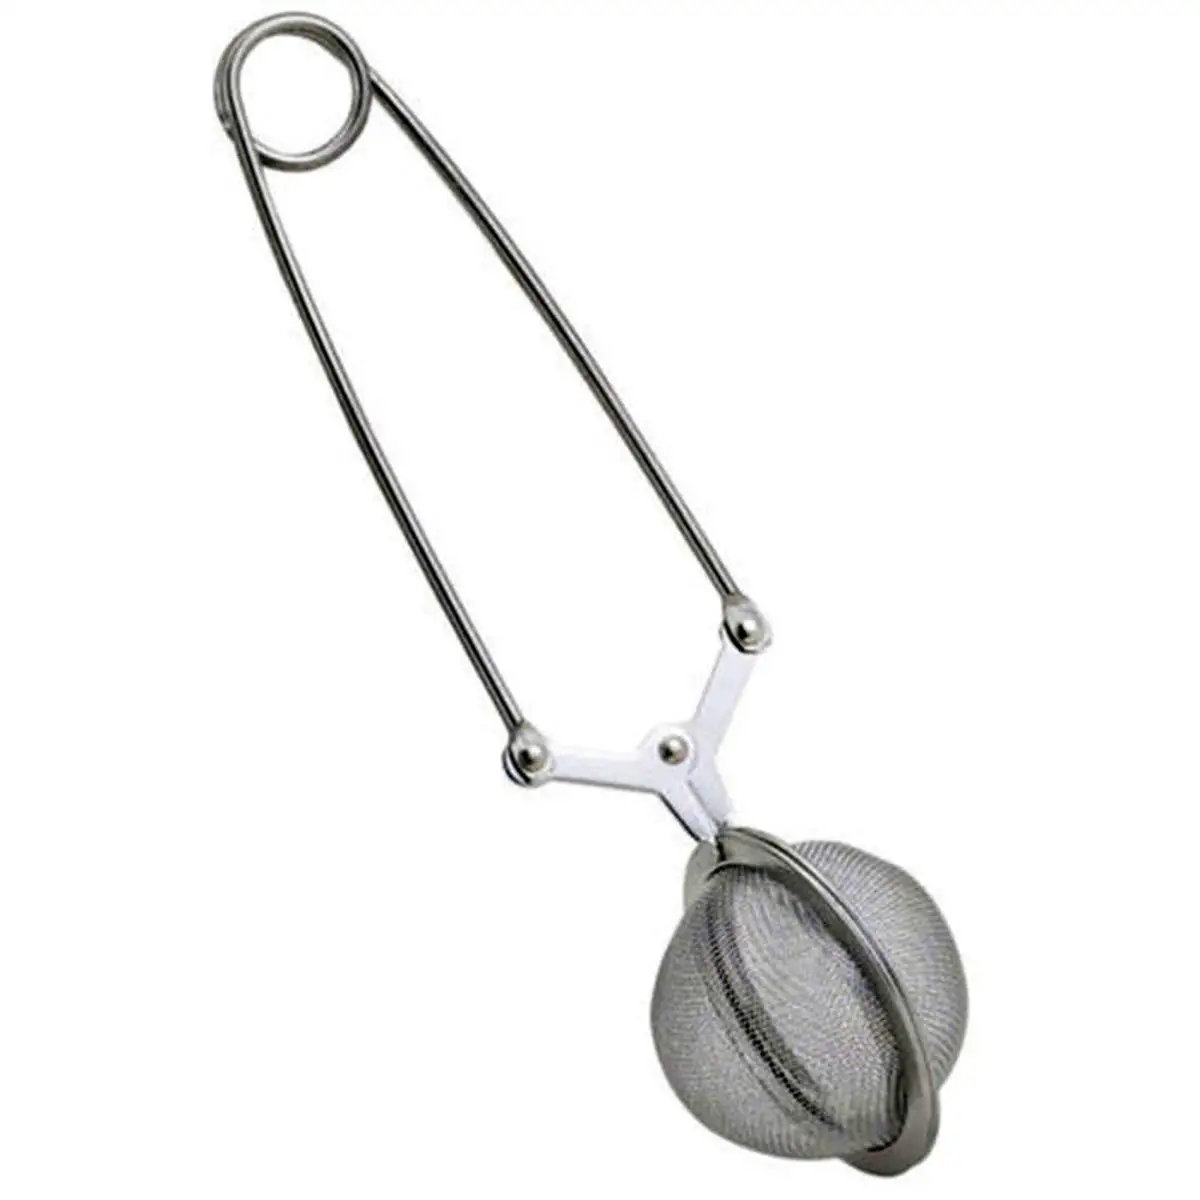 Stainless Steel Sphere Mesh Infuser Spice Ball Tea Strainer 2 Inch Dia